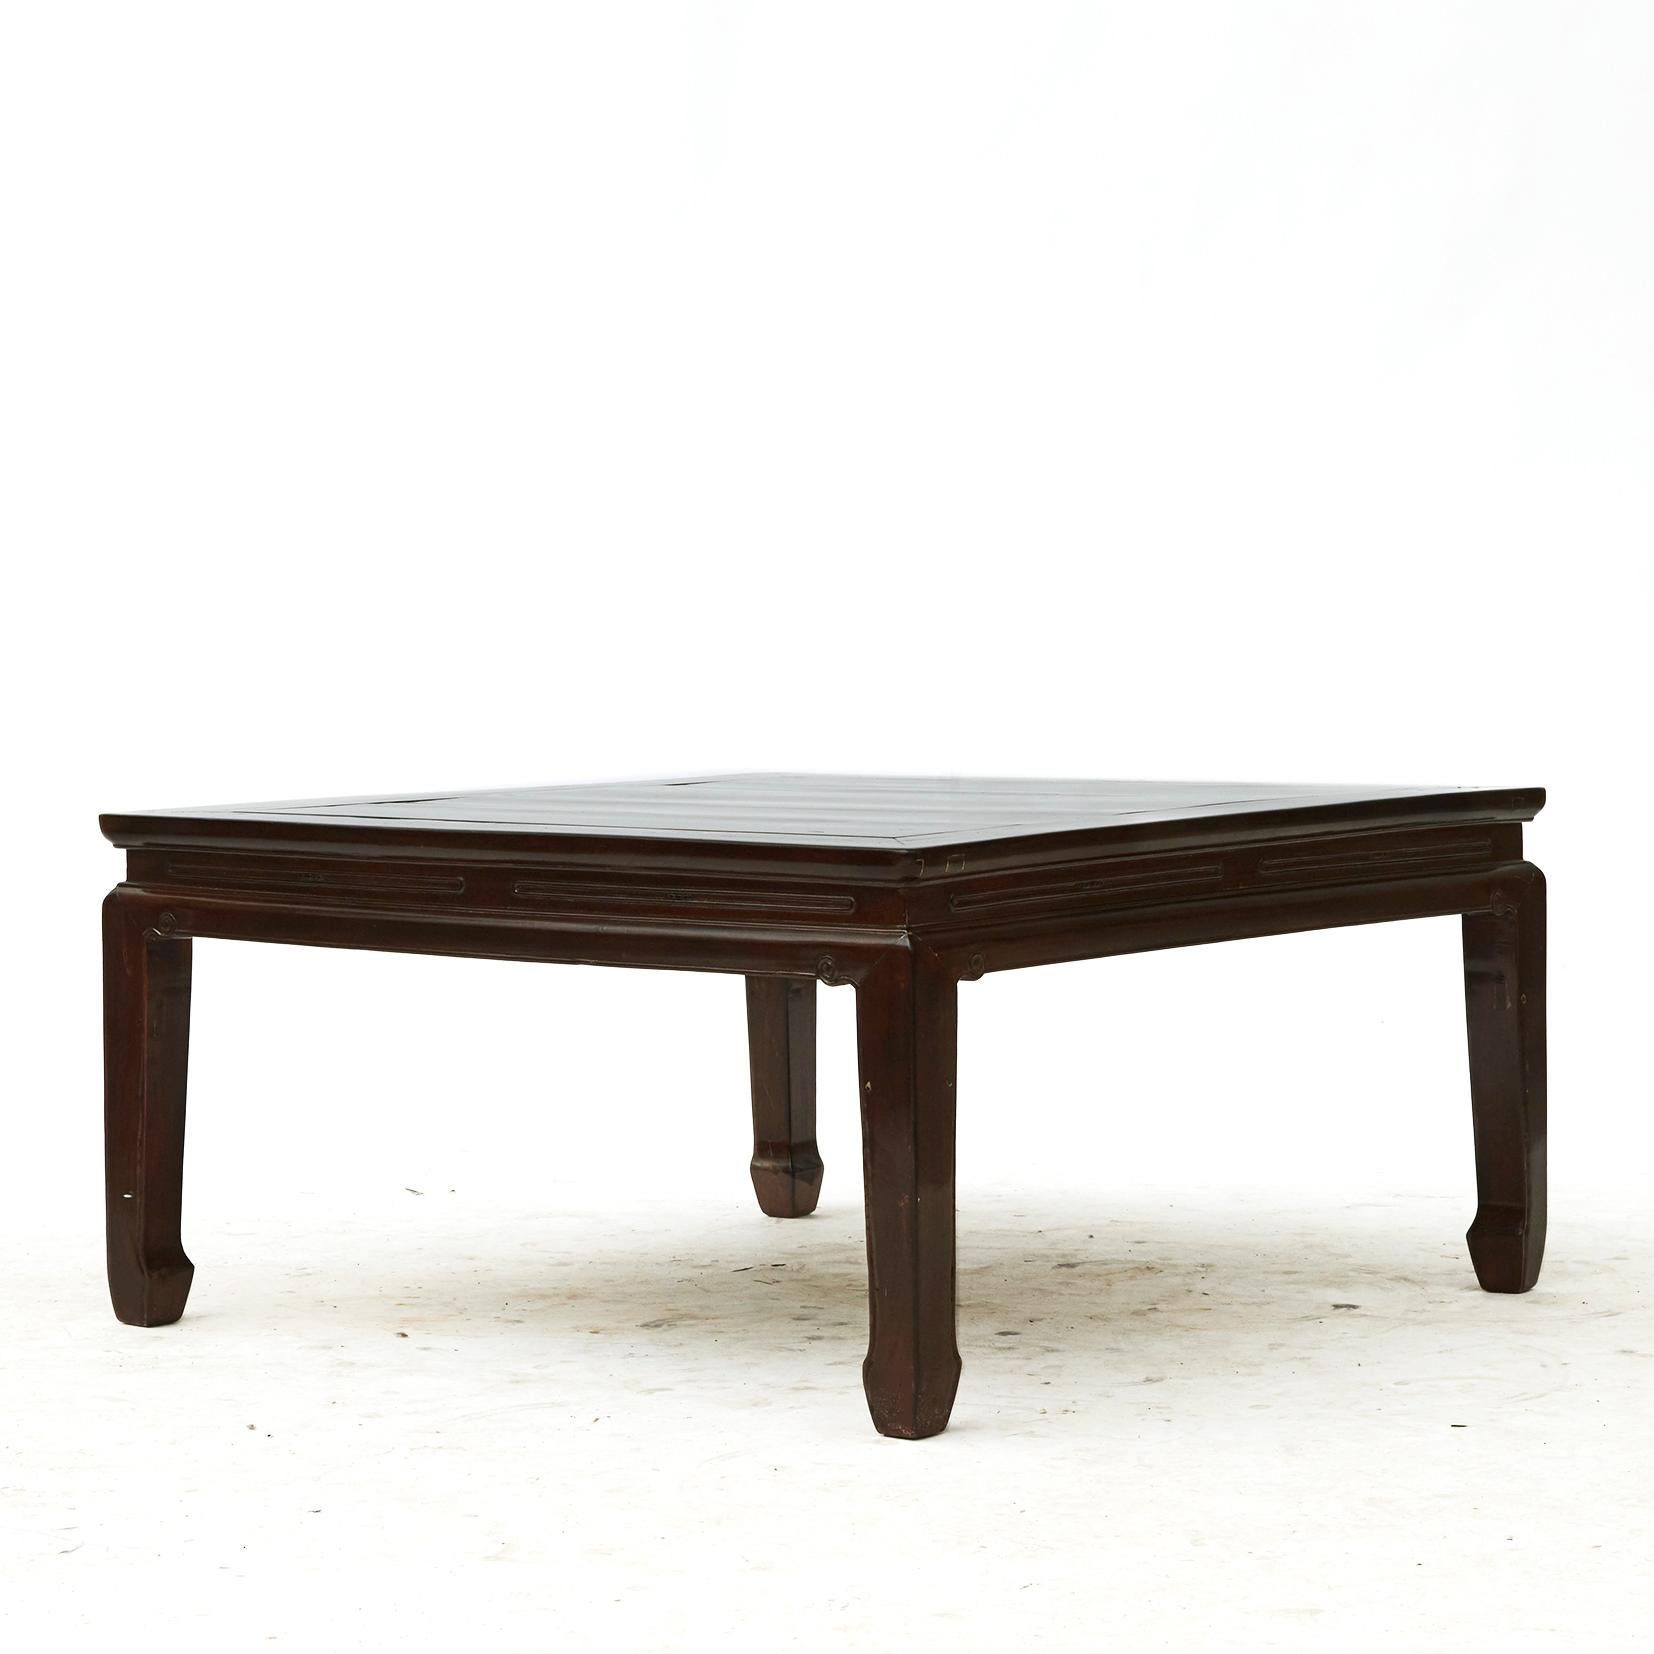 A Chinese Qing Dynasty period elm wood coffee table with square top.
The table has a natural age-related patina.

From Jiangsu province, Qing period, 1860-1880.